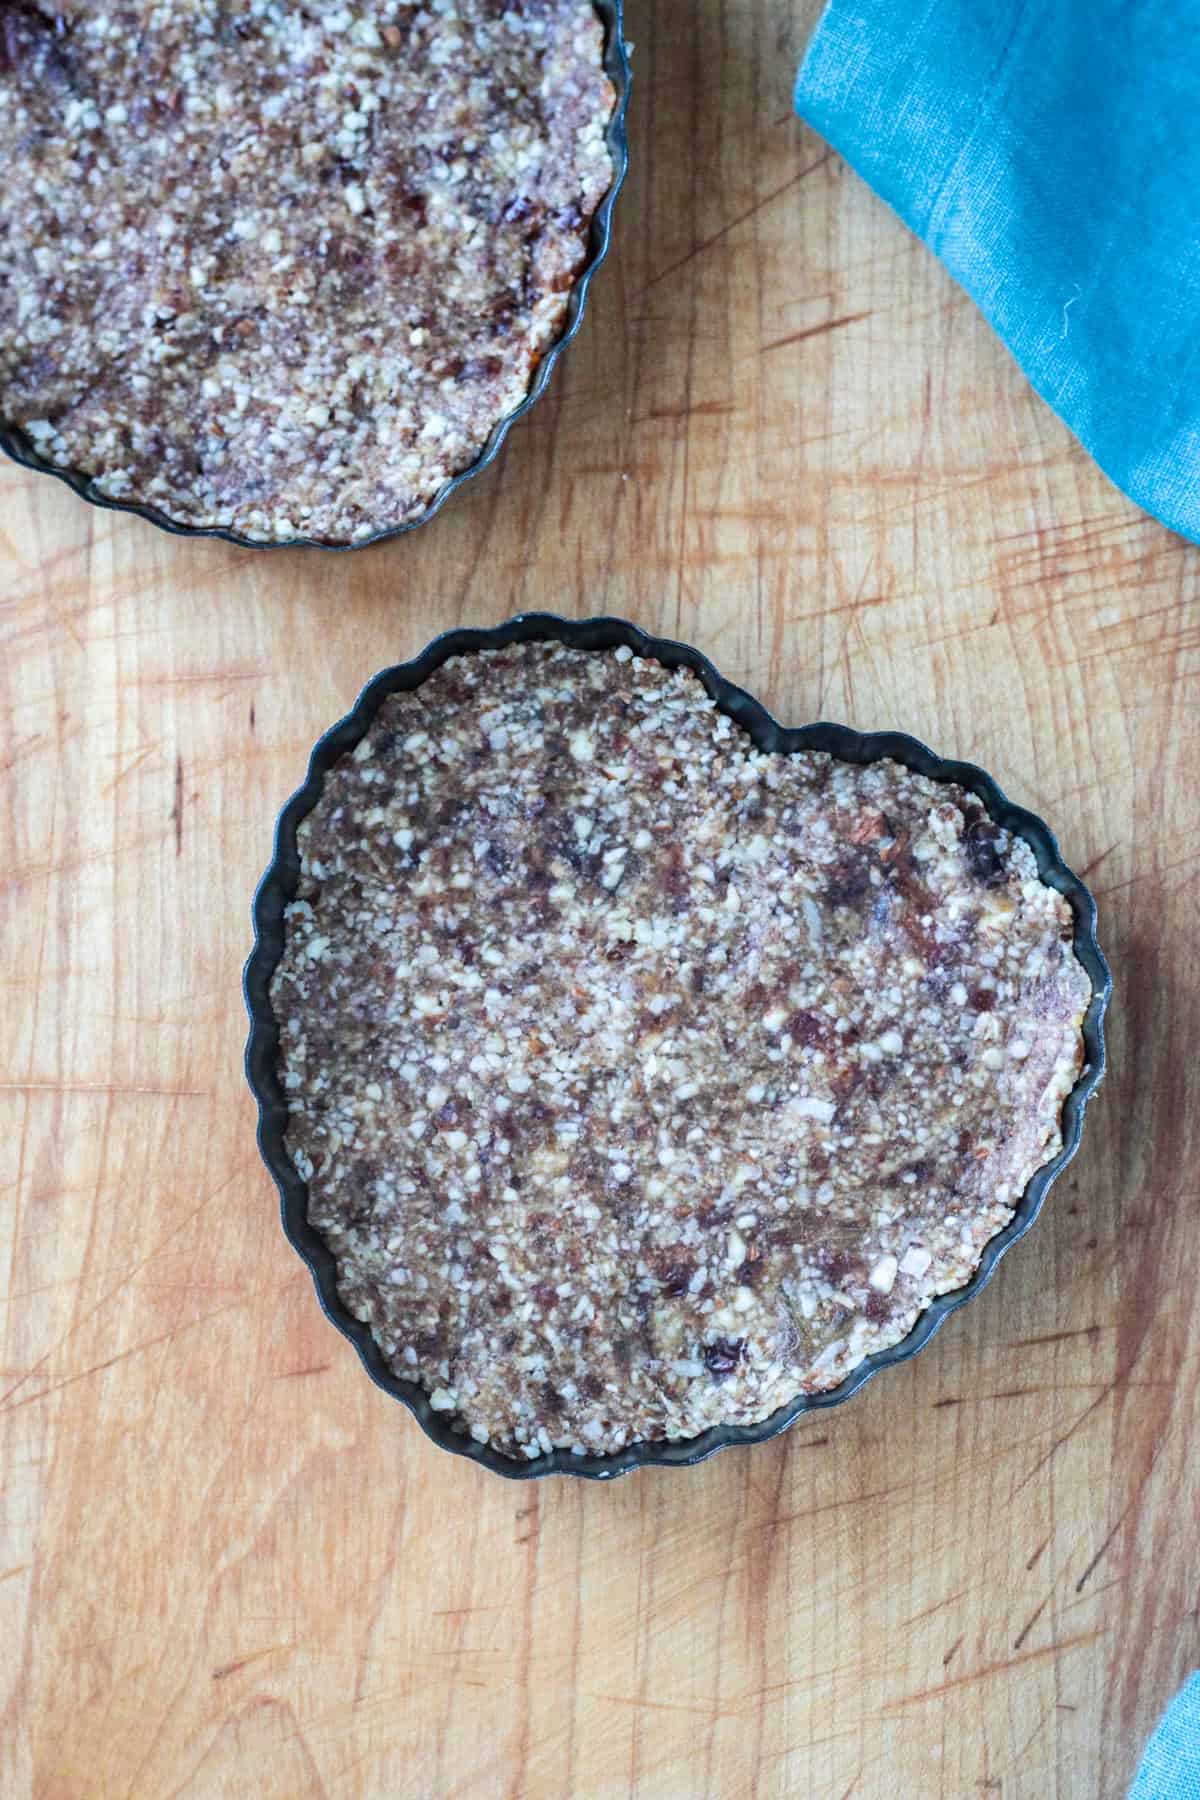 Crust pressed into heart shaped tart pans.